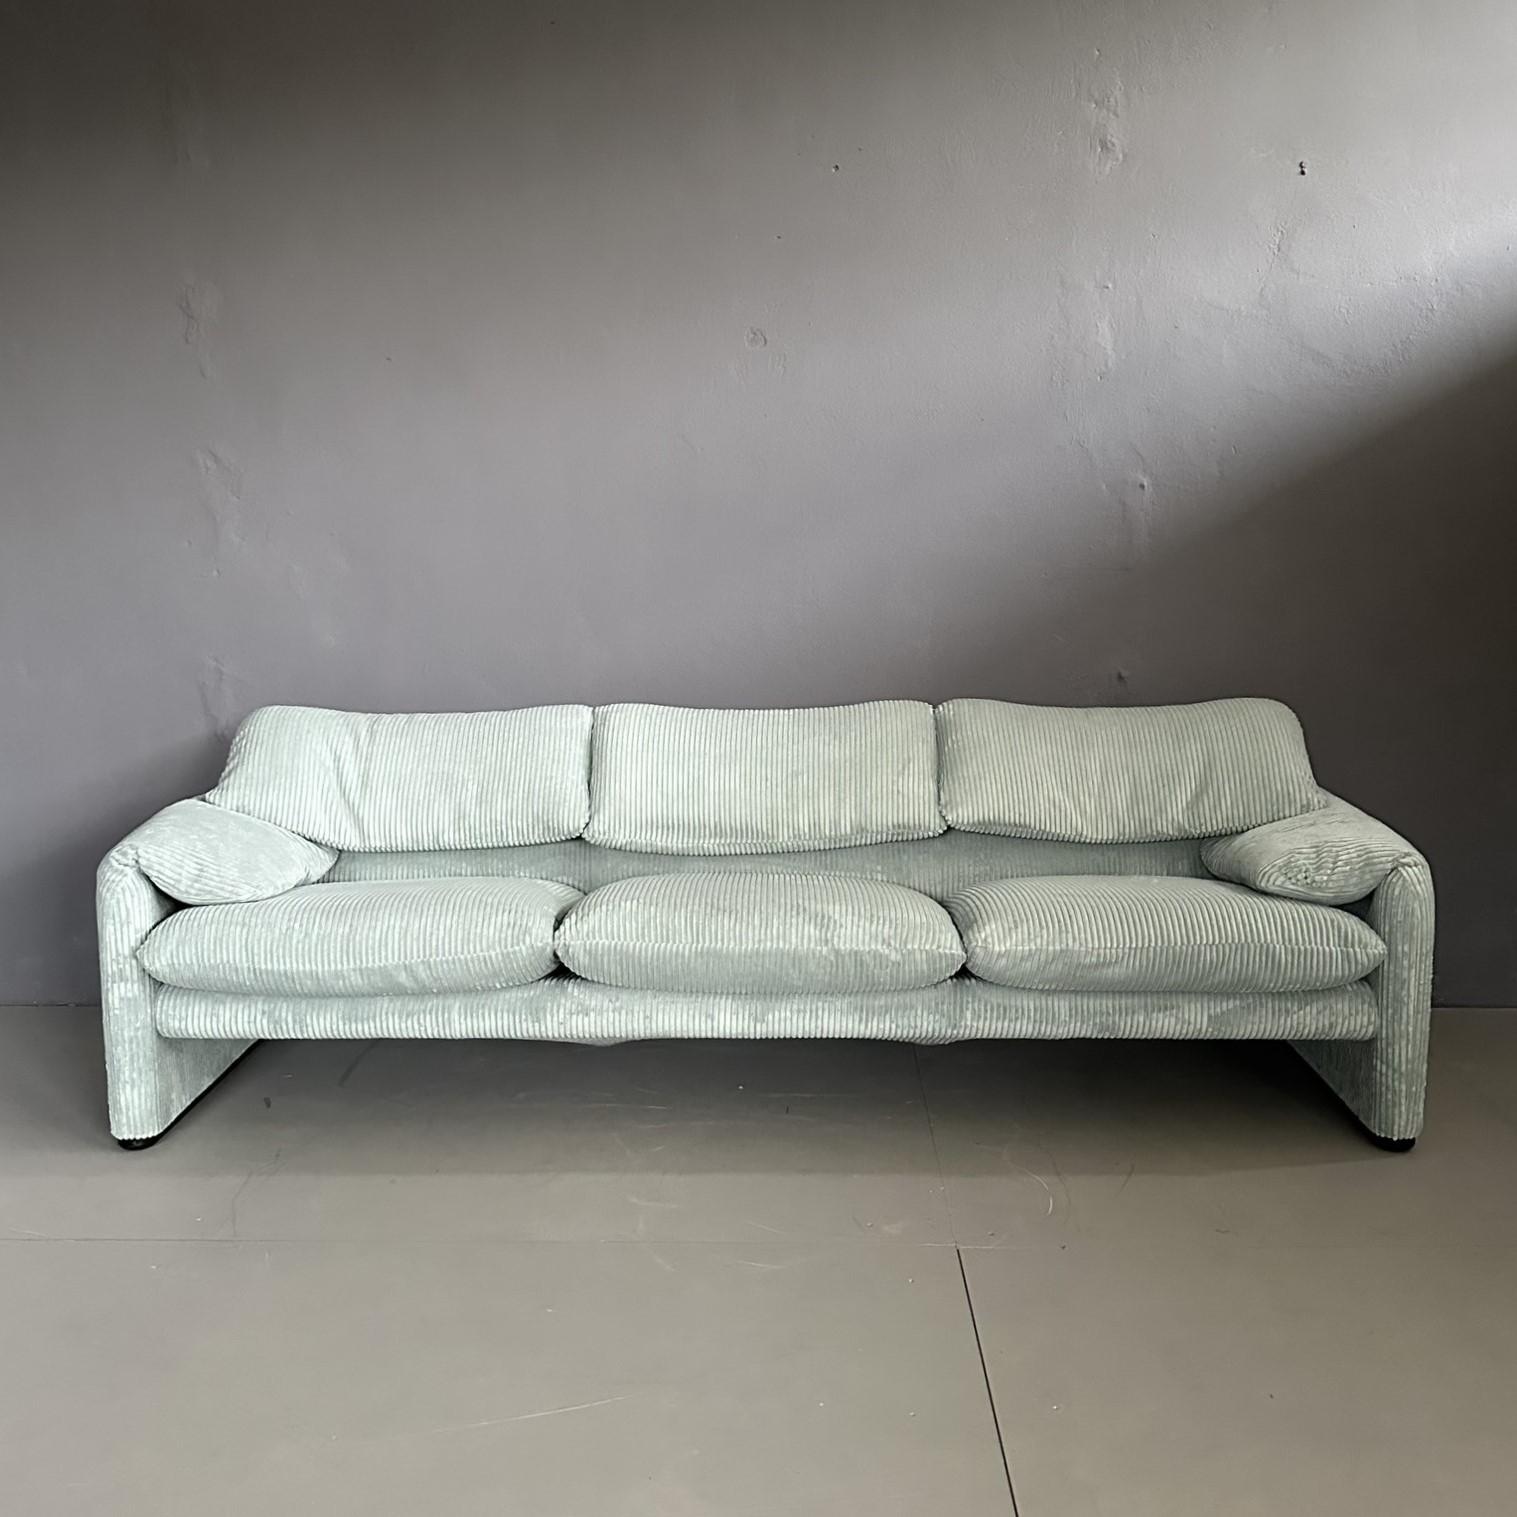 Maralunga three-seater sofa designed by Vico Magistretti for Cassina in the 1970s.
Ribbed light mint green fabric upholstery.
The movement of the backrest and lateral armrests is functional